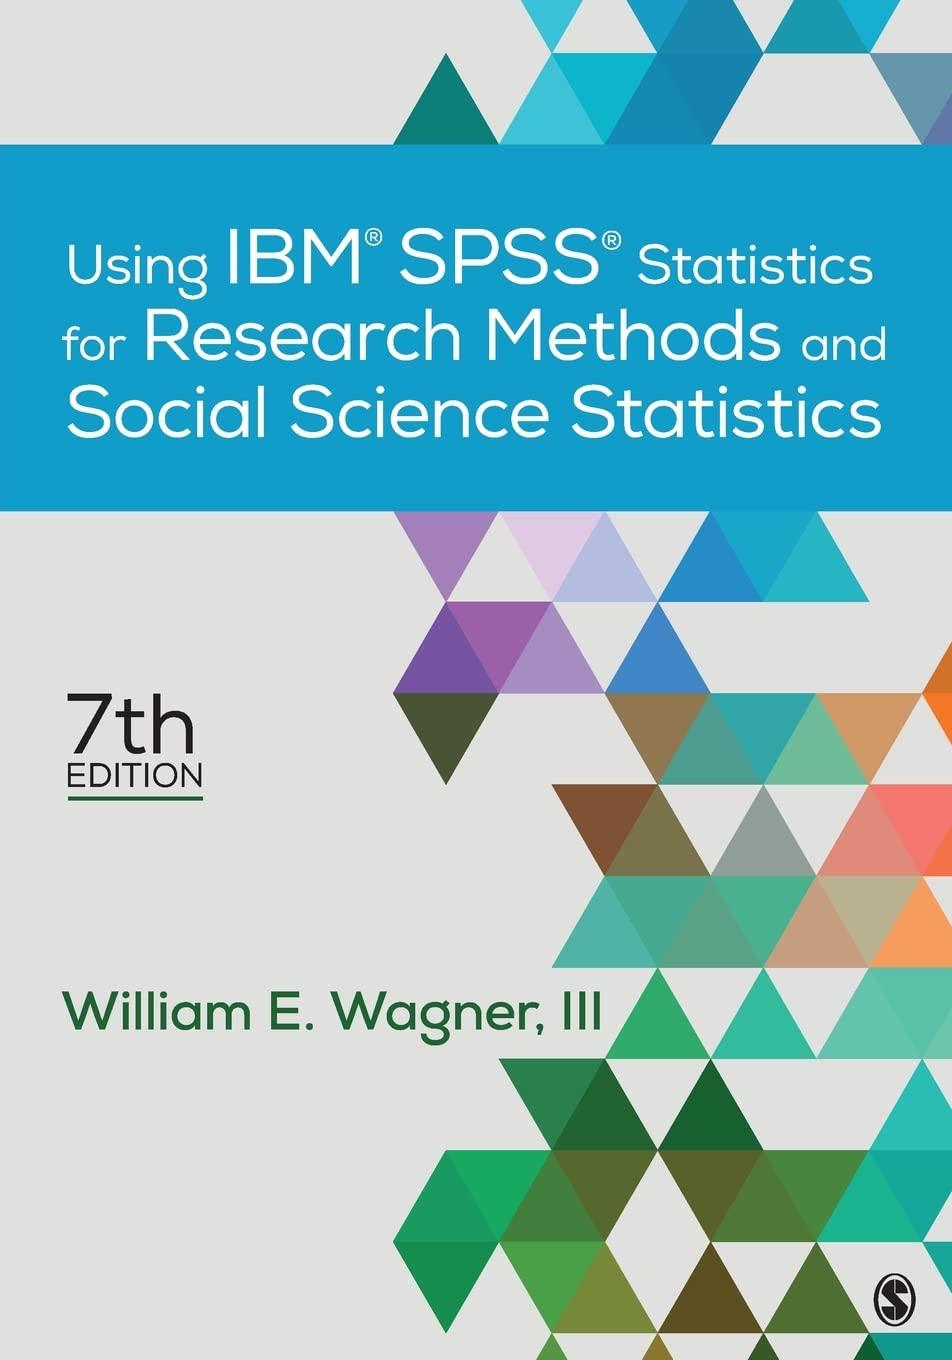 using ibm spss statistics for research methods and social science statistics 7th edition william e. wagner